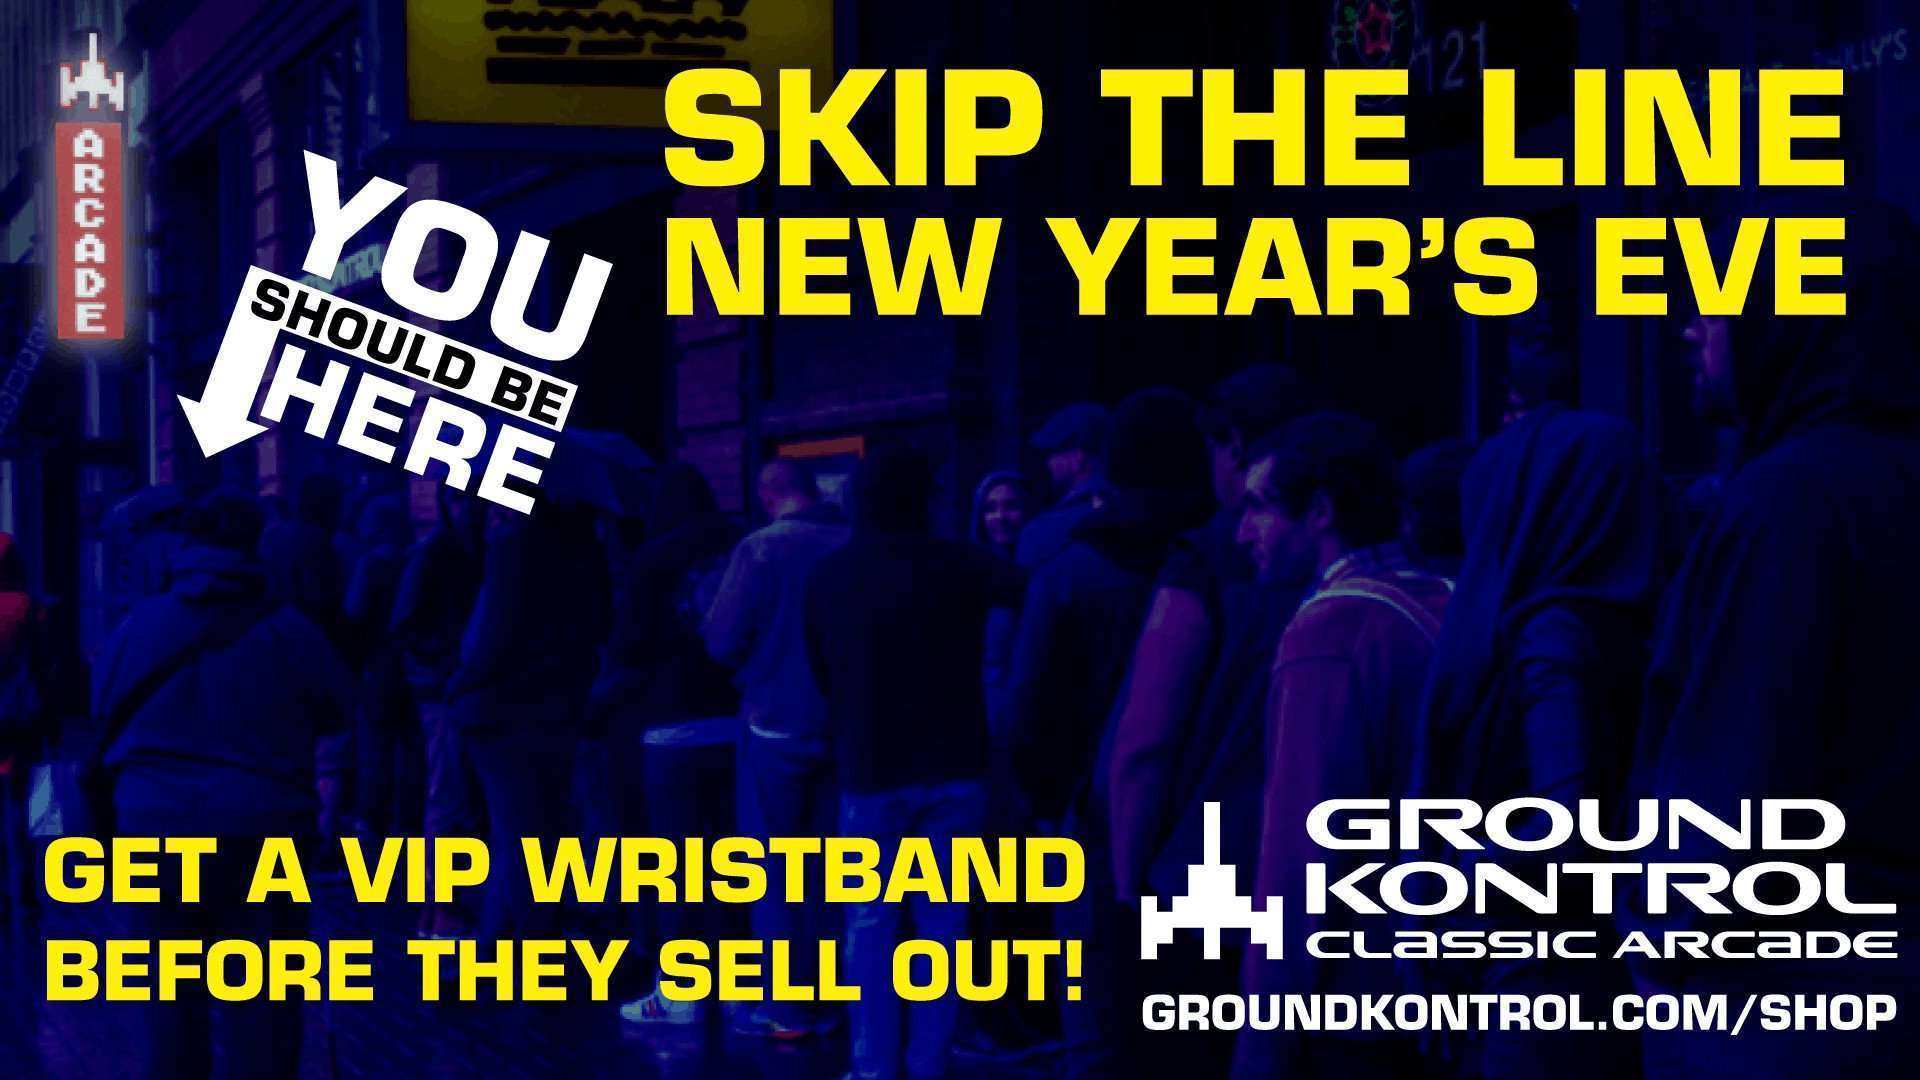 Now Available: New Year’s Eve 2019 VIP Wristbands – While They Last!